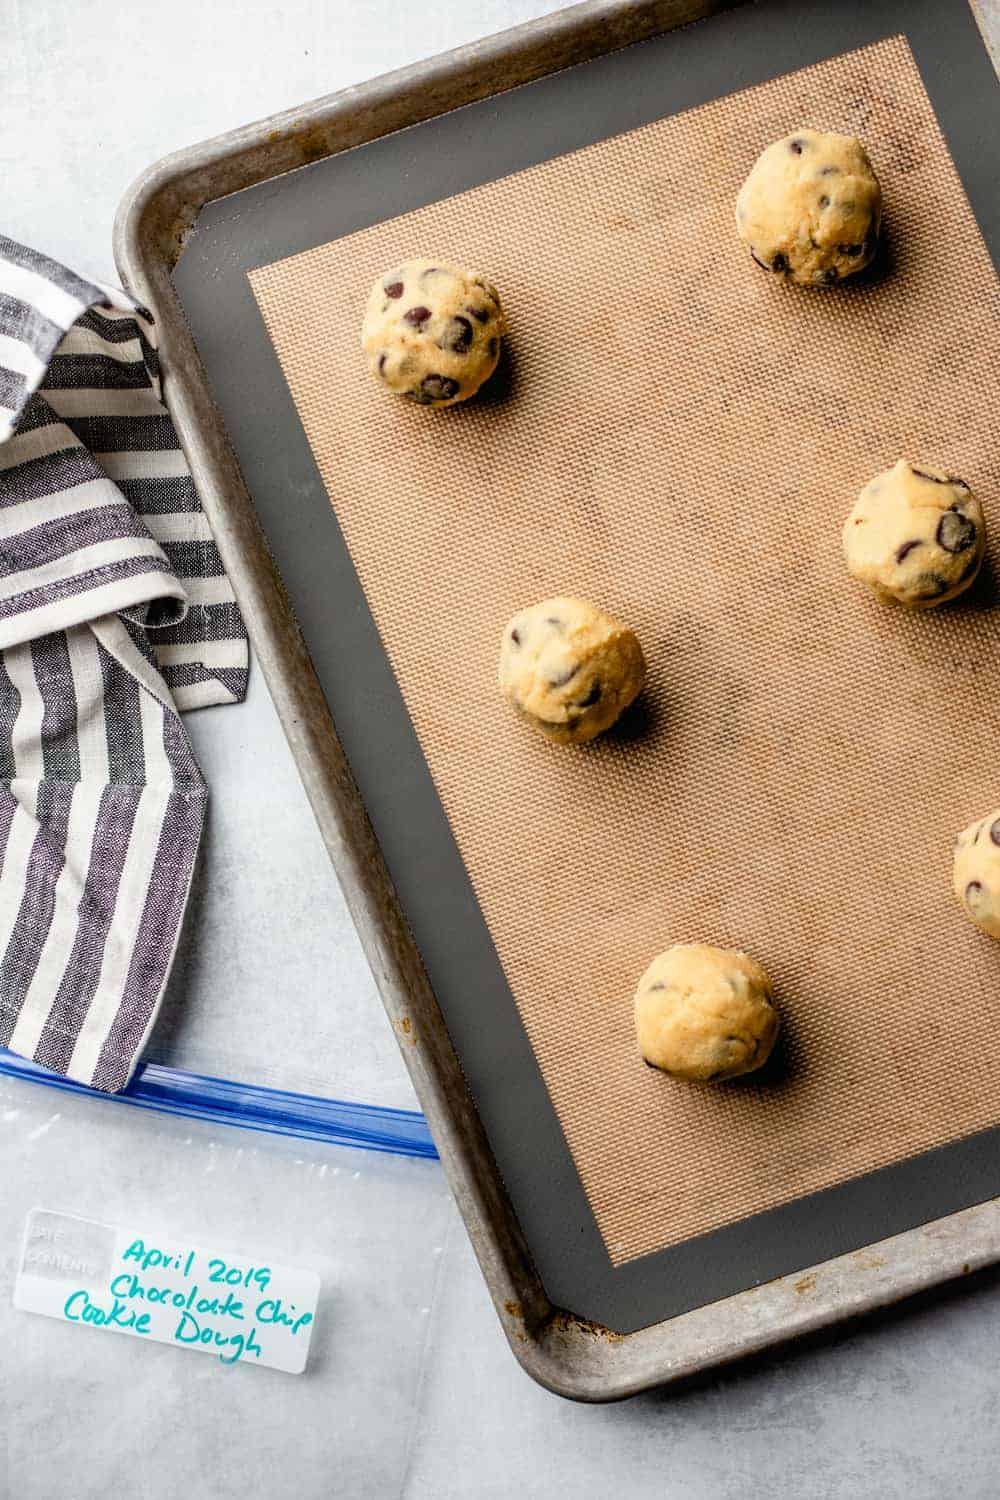 Bake up frozen cookie dough from frozen or after thawing